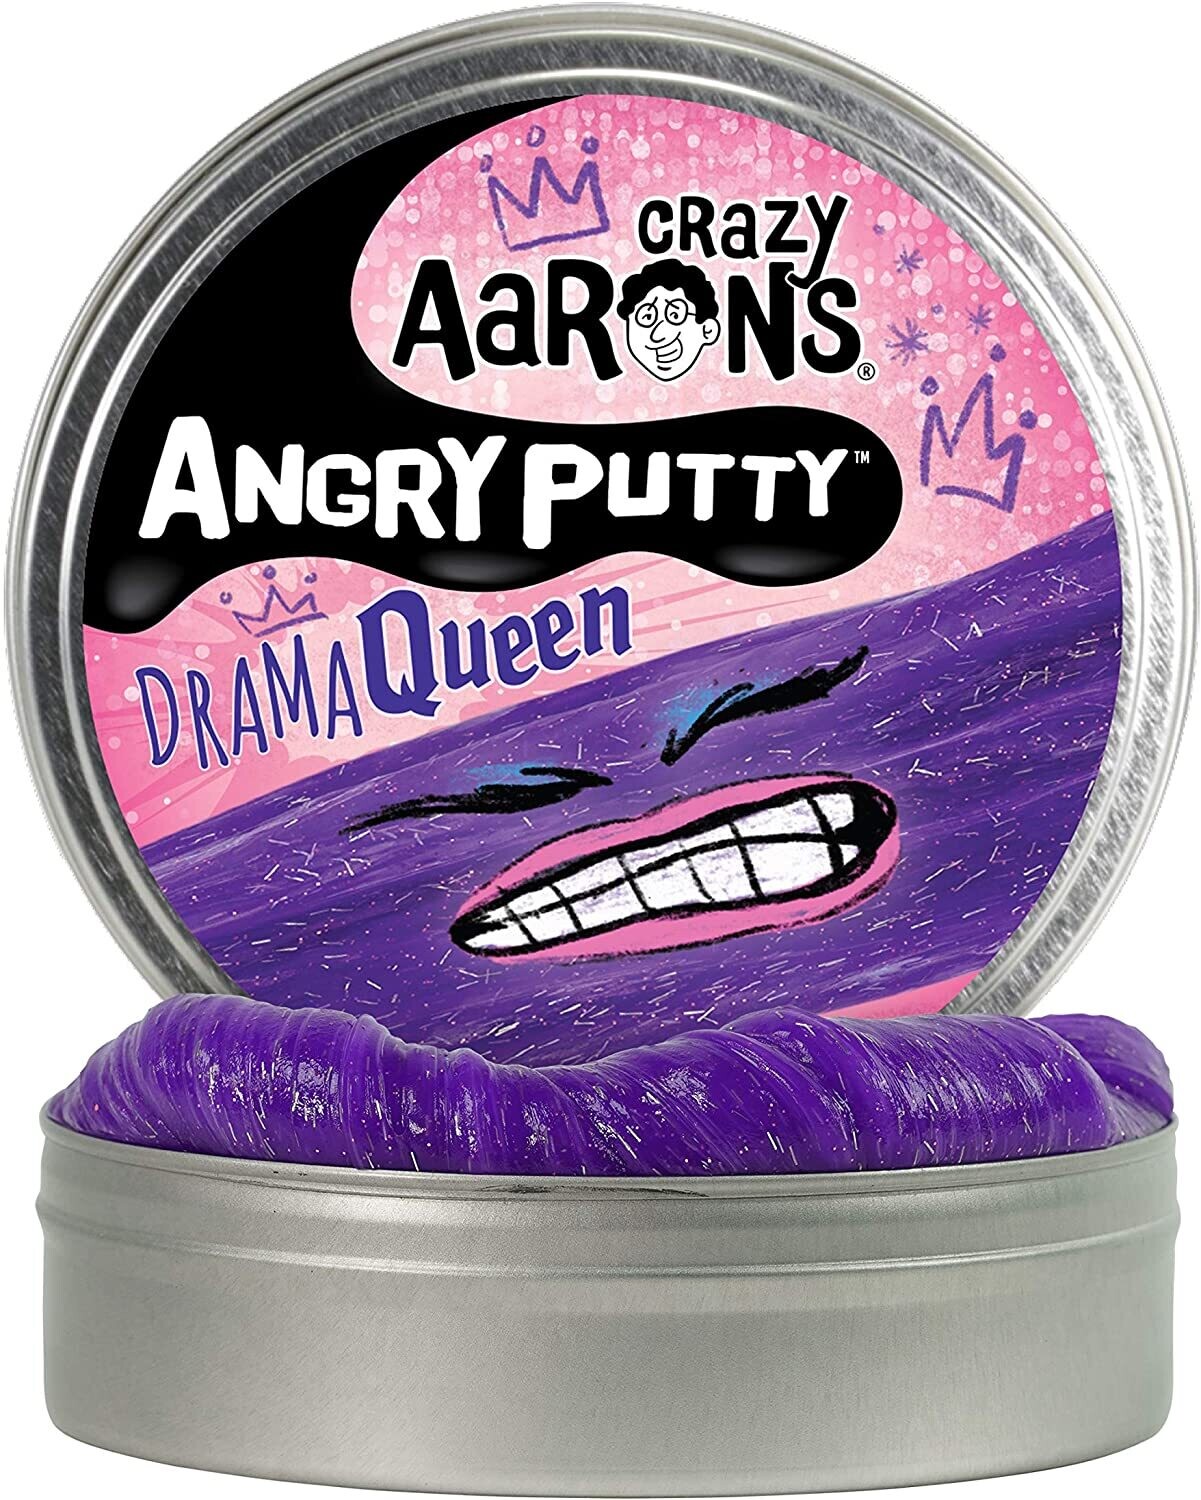 Crazy Aaron's Thinking Putty Angry Putty Drama Queen